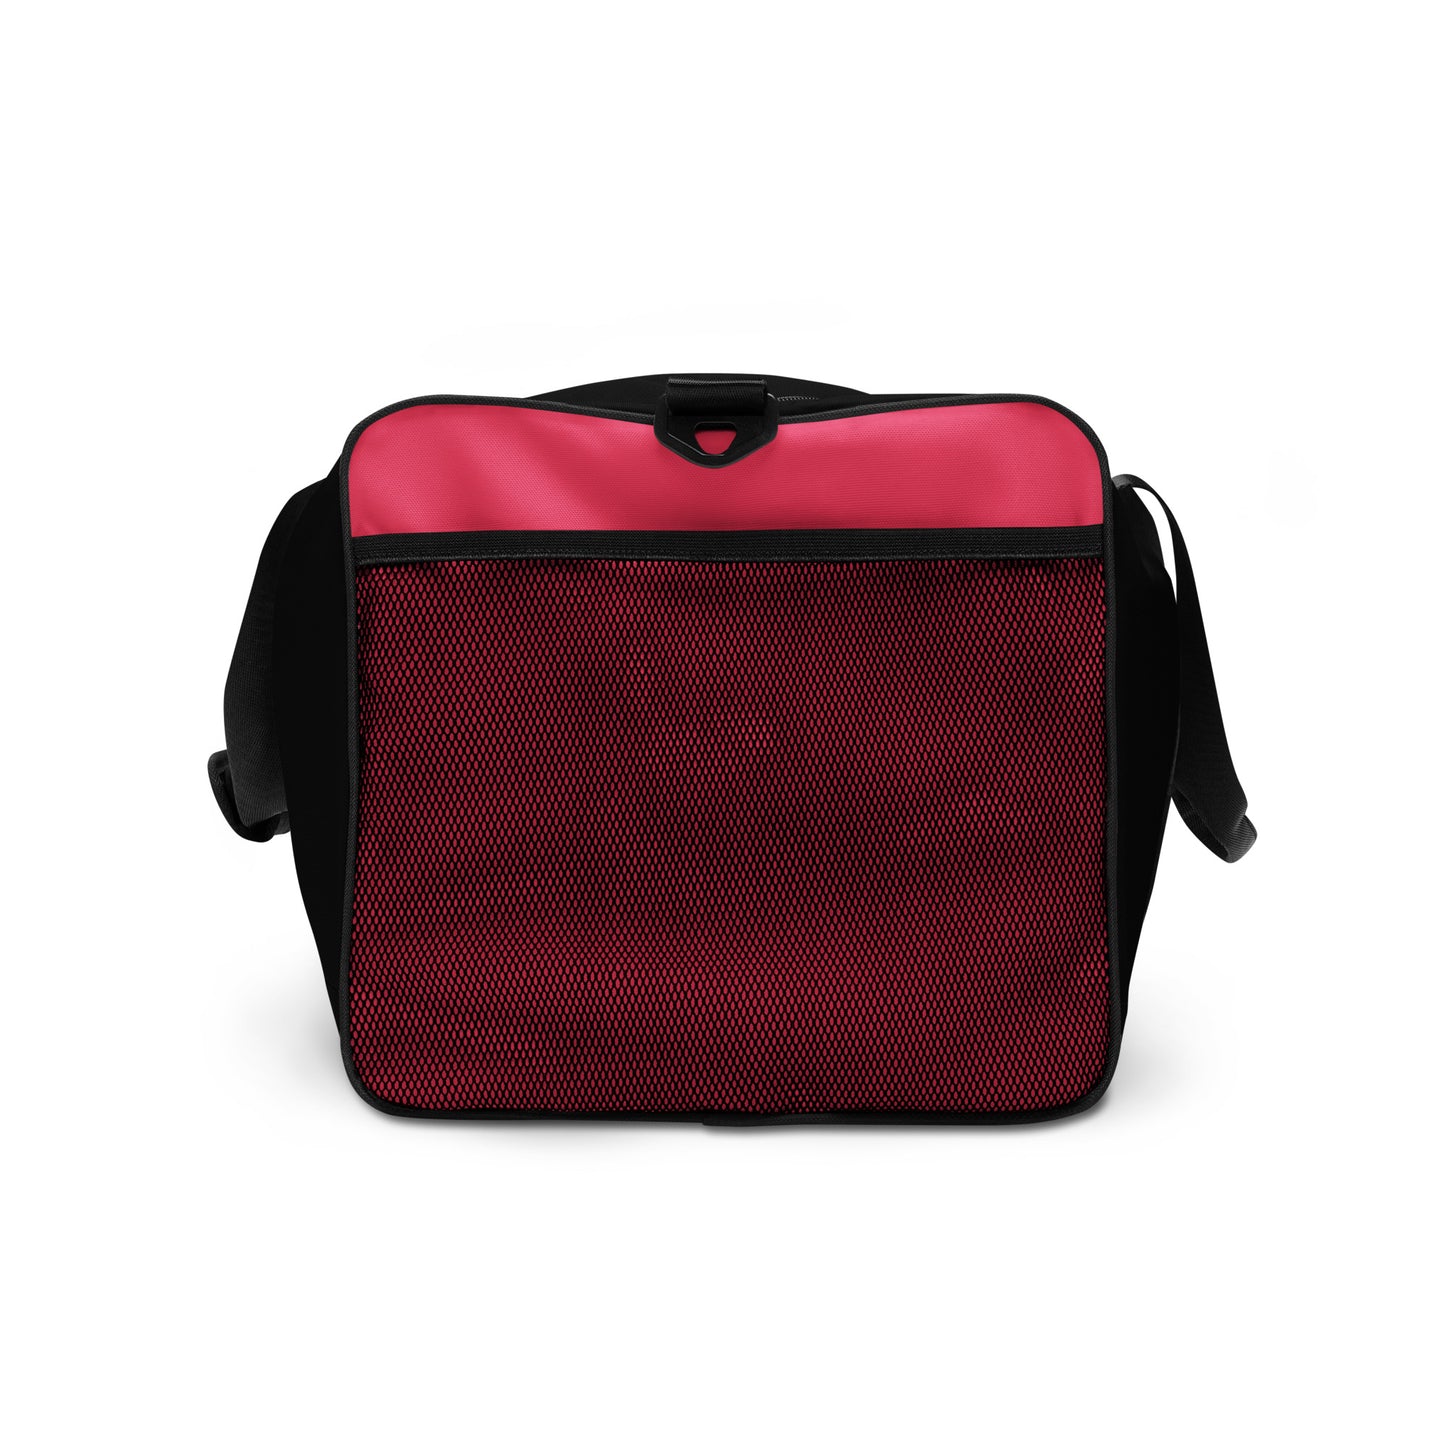 The Clean Living Project Duffle Bag (black)